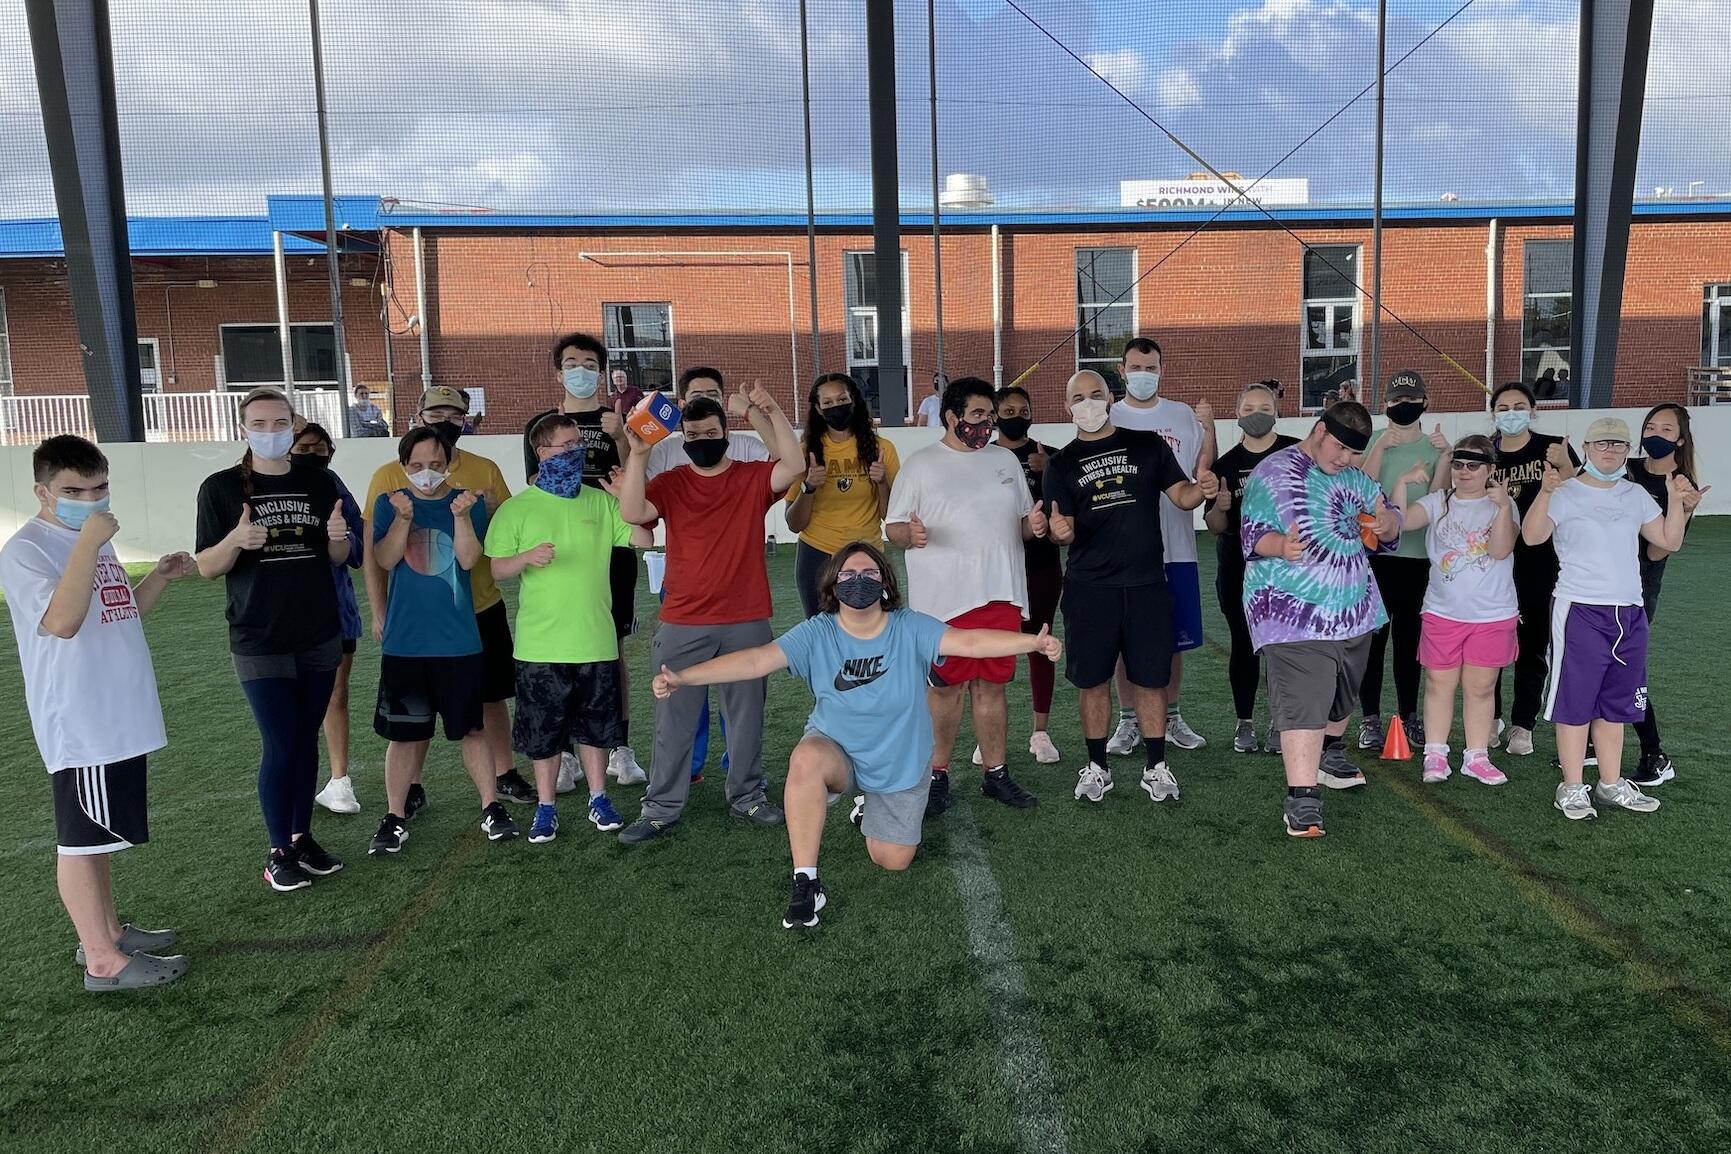 Over the past three years, the Department of Kinesiology and Health Sciences' Inclusive Fitness and Health program has worked with the nonprofit Jacob's Chance to provide exercise, social activity and more with children and young people with disabilities.